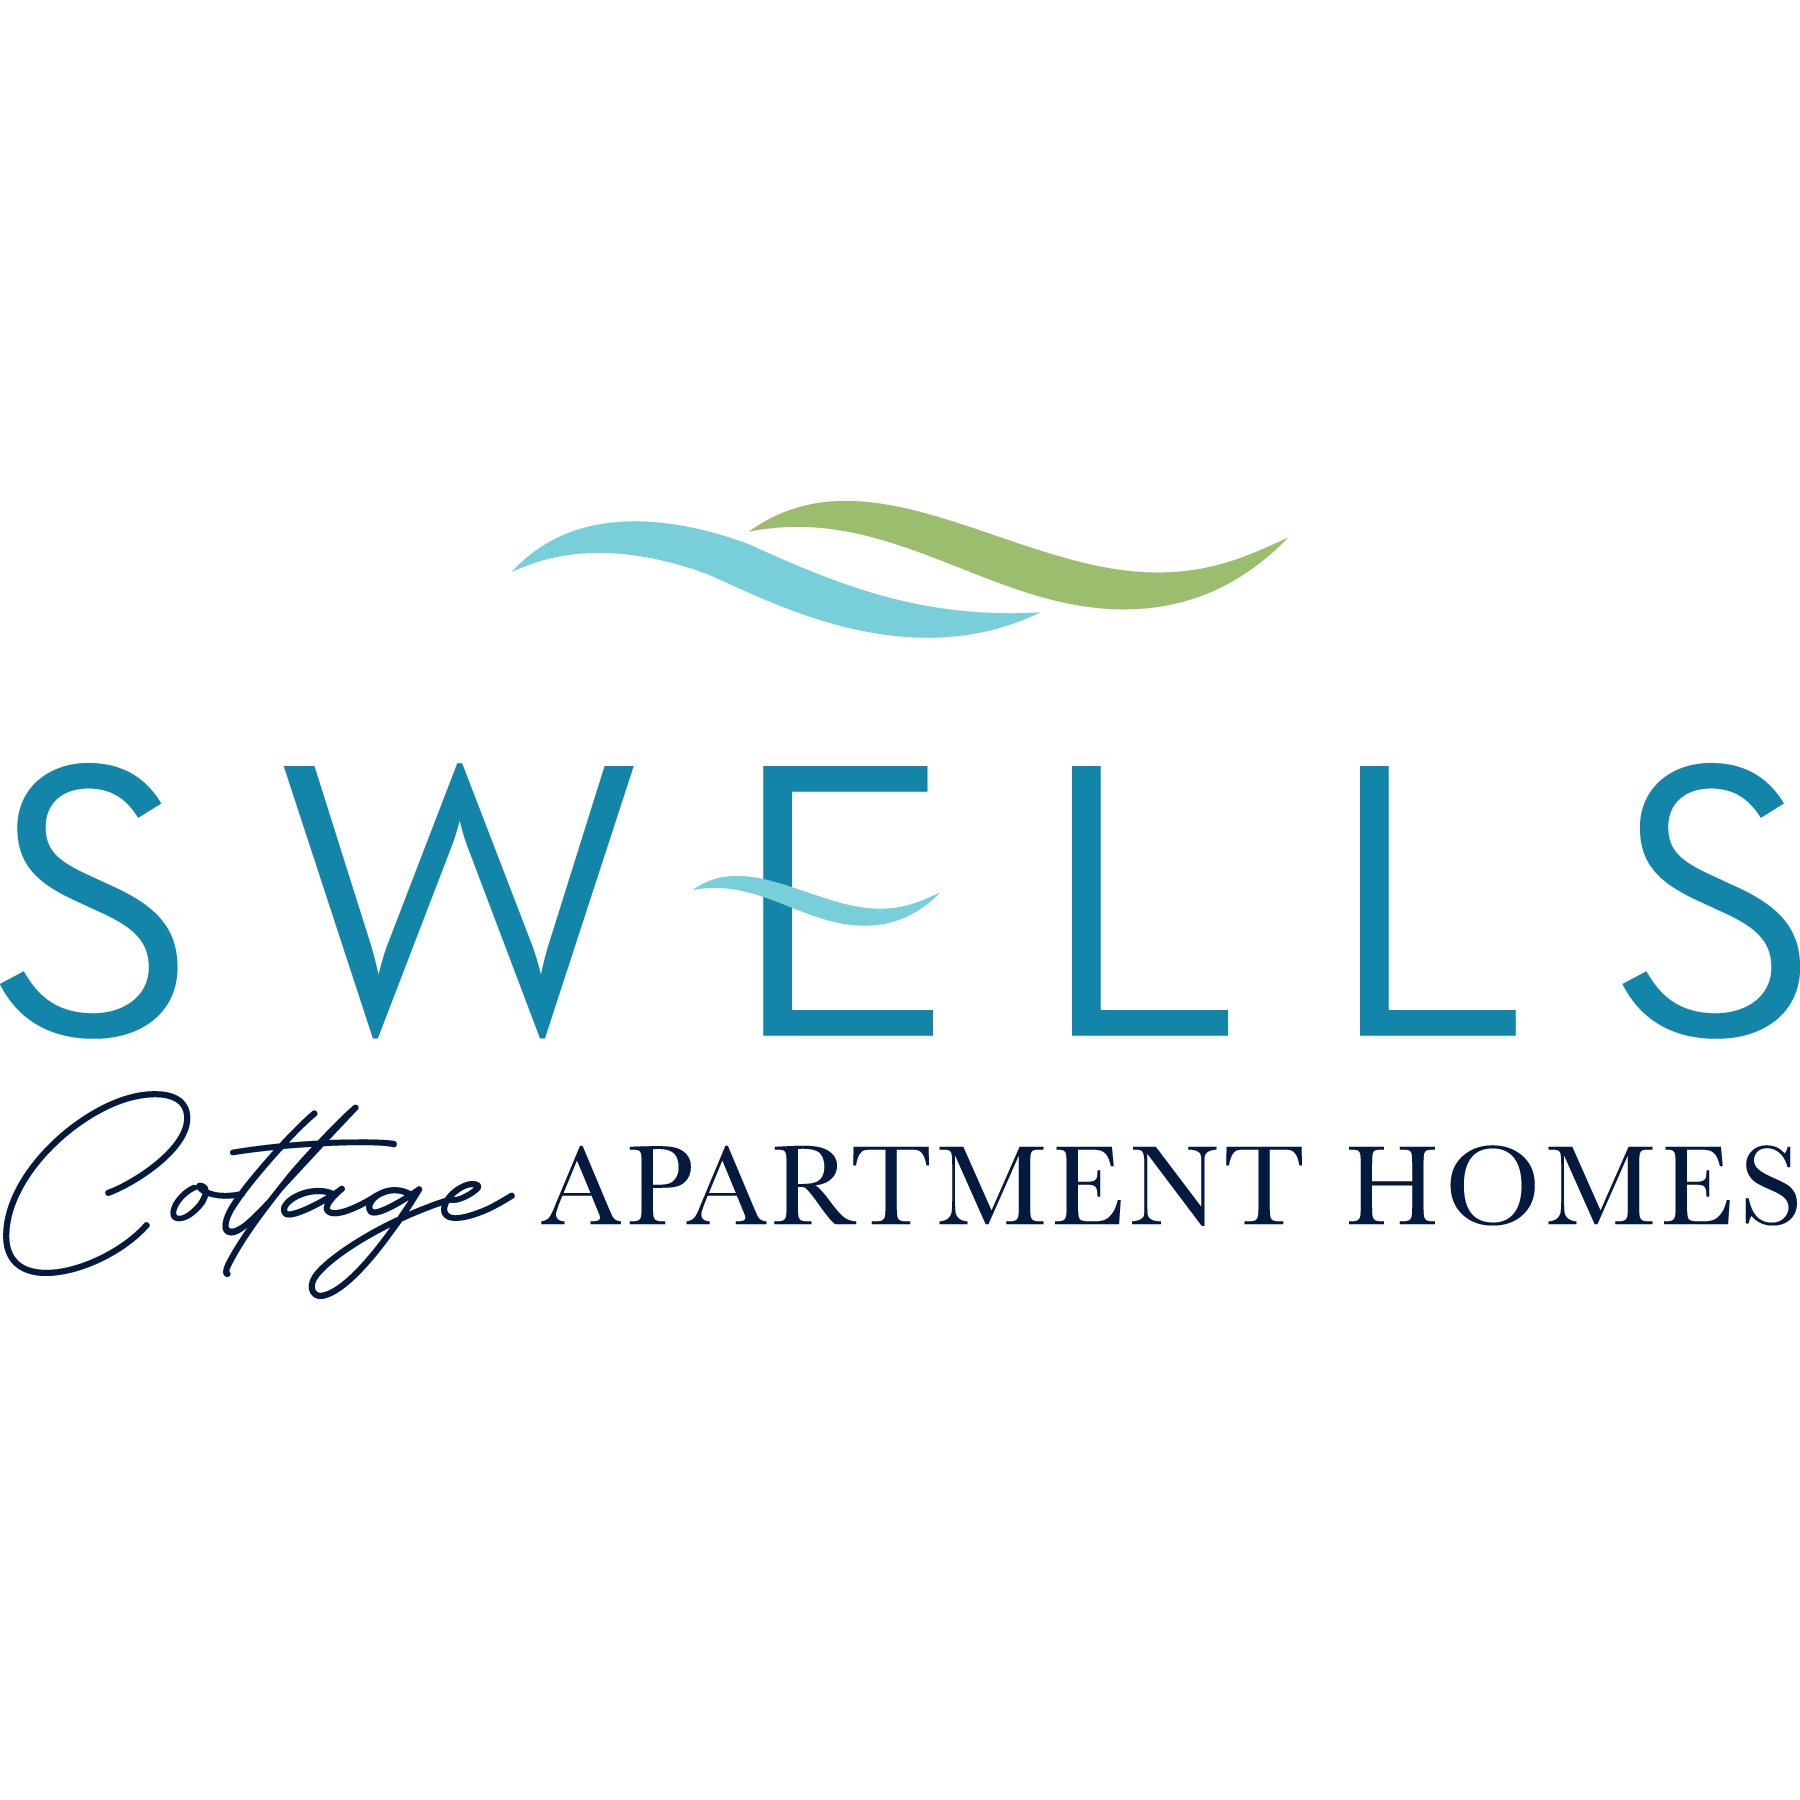 Swells Cottage Apartment Homes